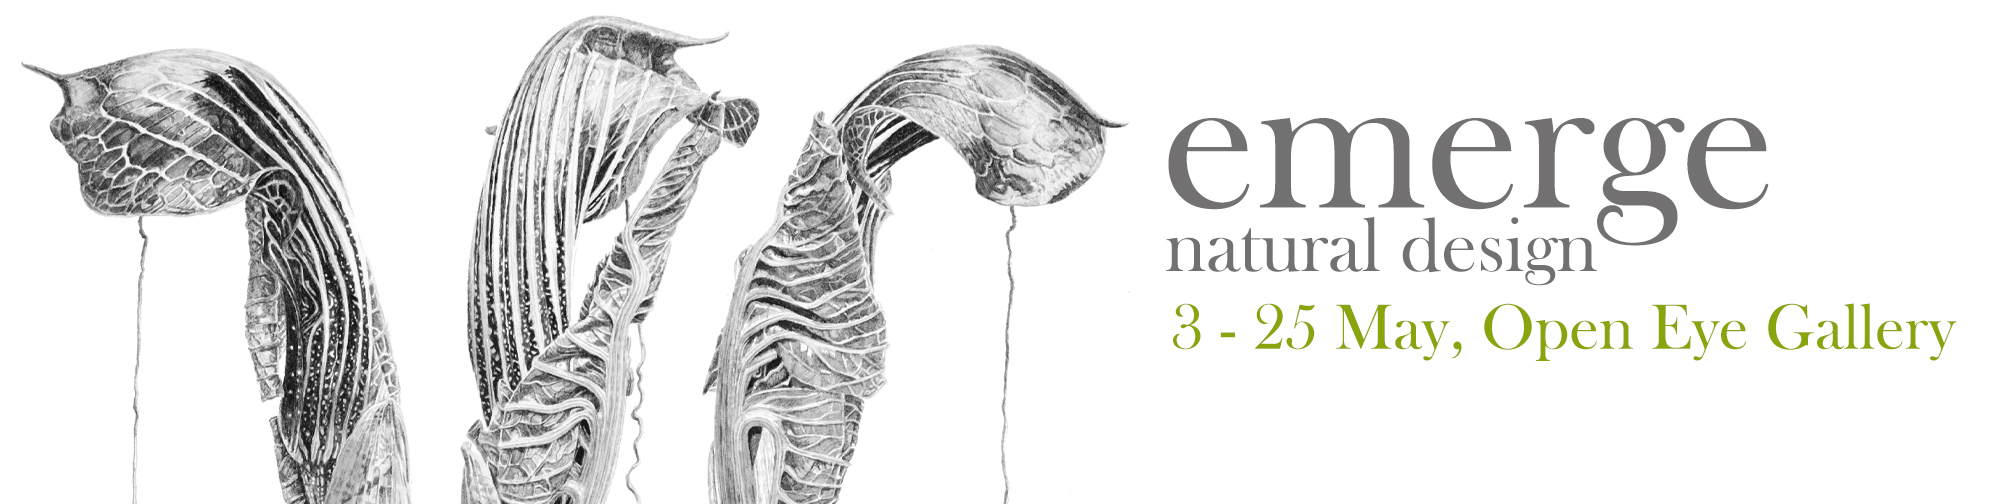 emerge : natural design  at the Open Eye Gallery 3 - 25 May - An exhibition of contemporary botanical illustration in pen and ink